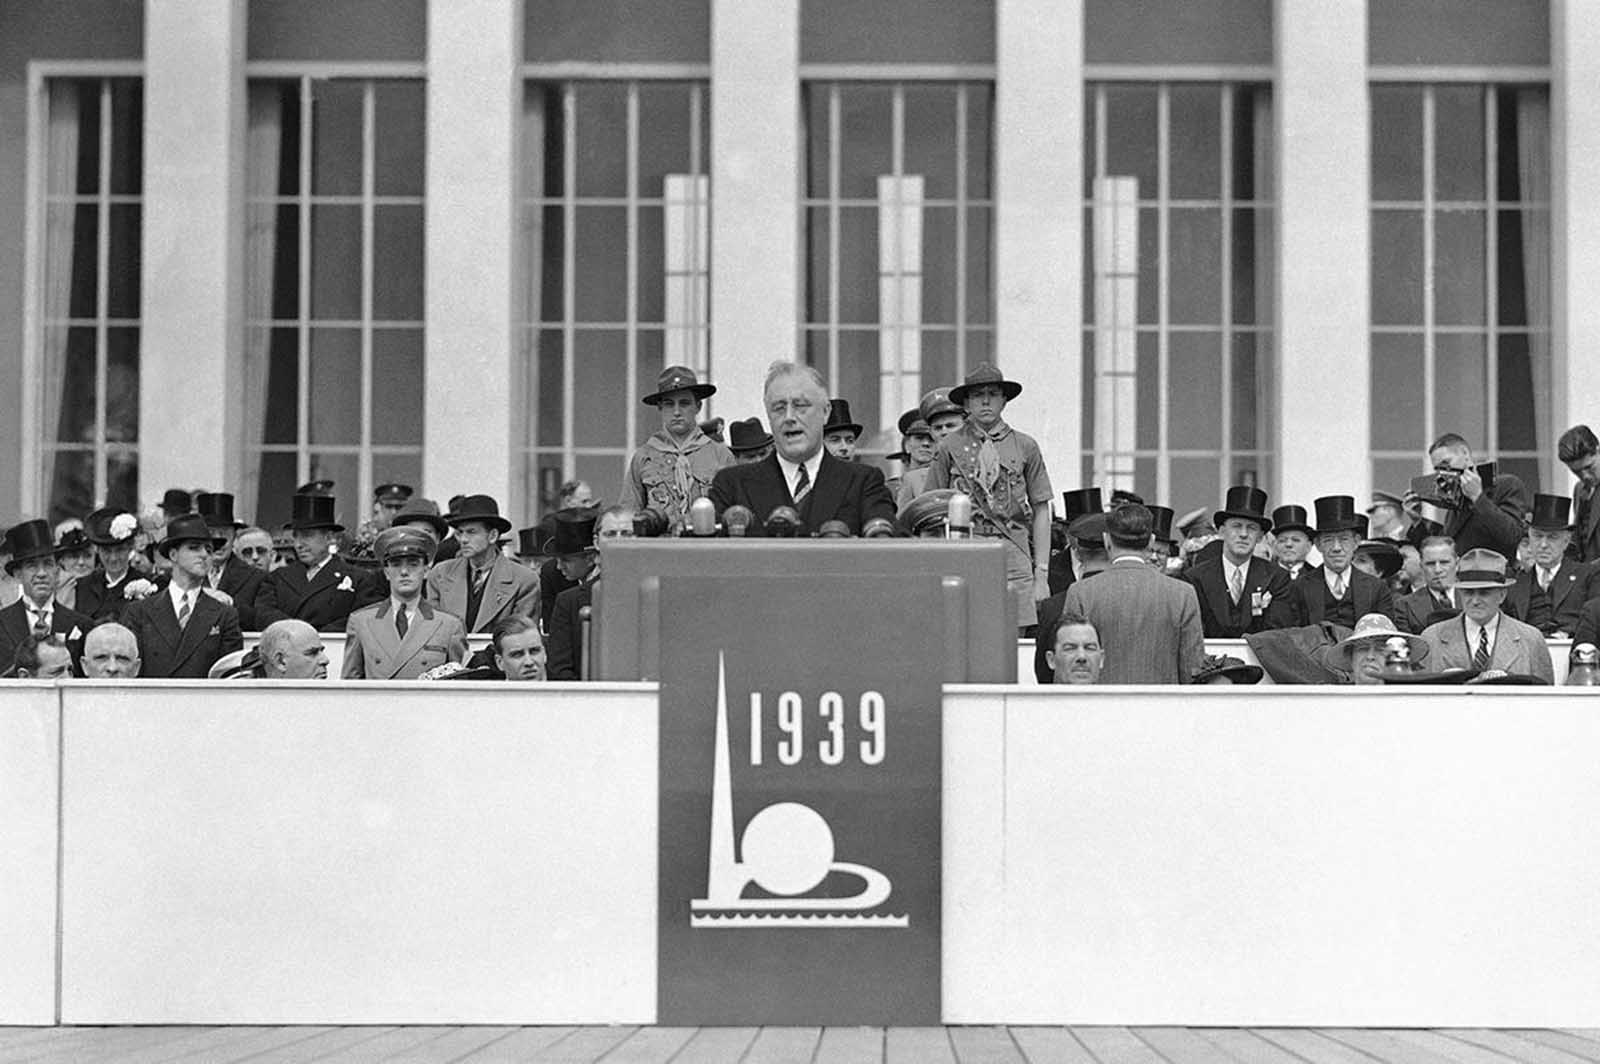 Flanked by Boy Scouts, President Franklin D. Roosevelt opened New York's $160,000,000 World's Fair with an address in which he said America has 